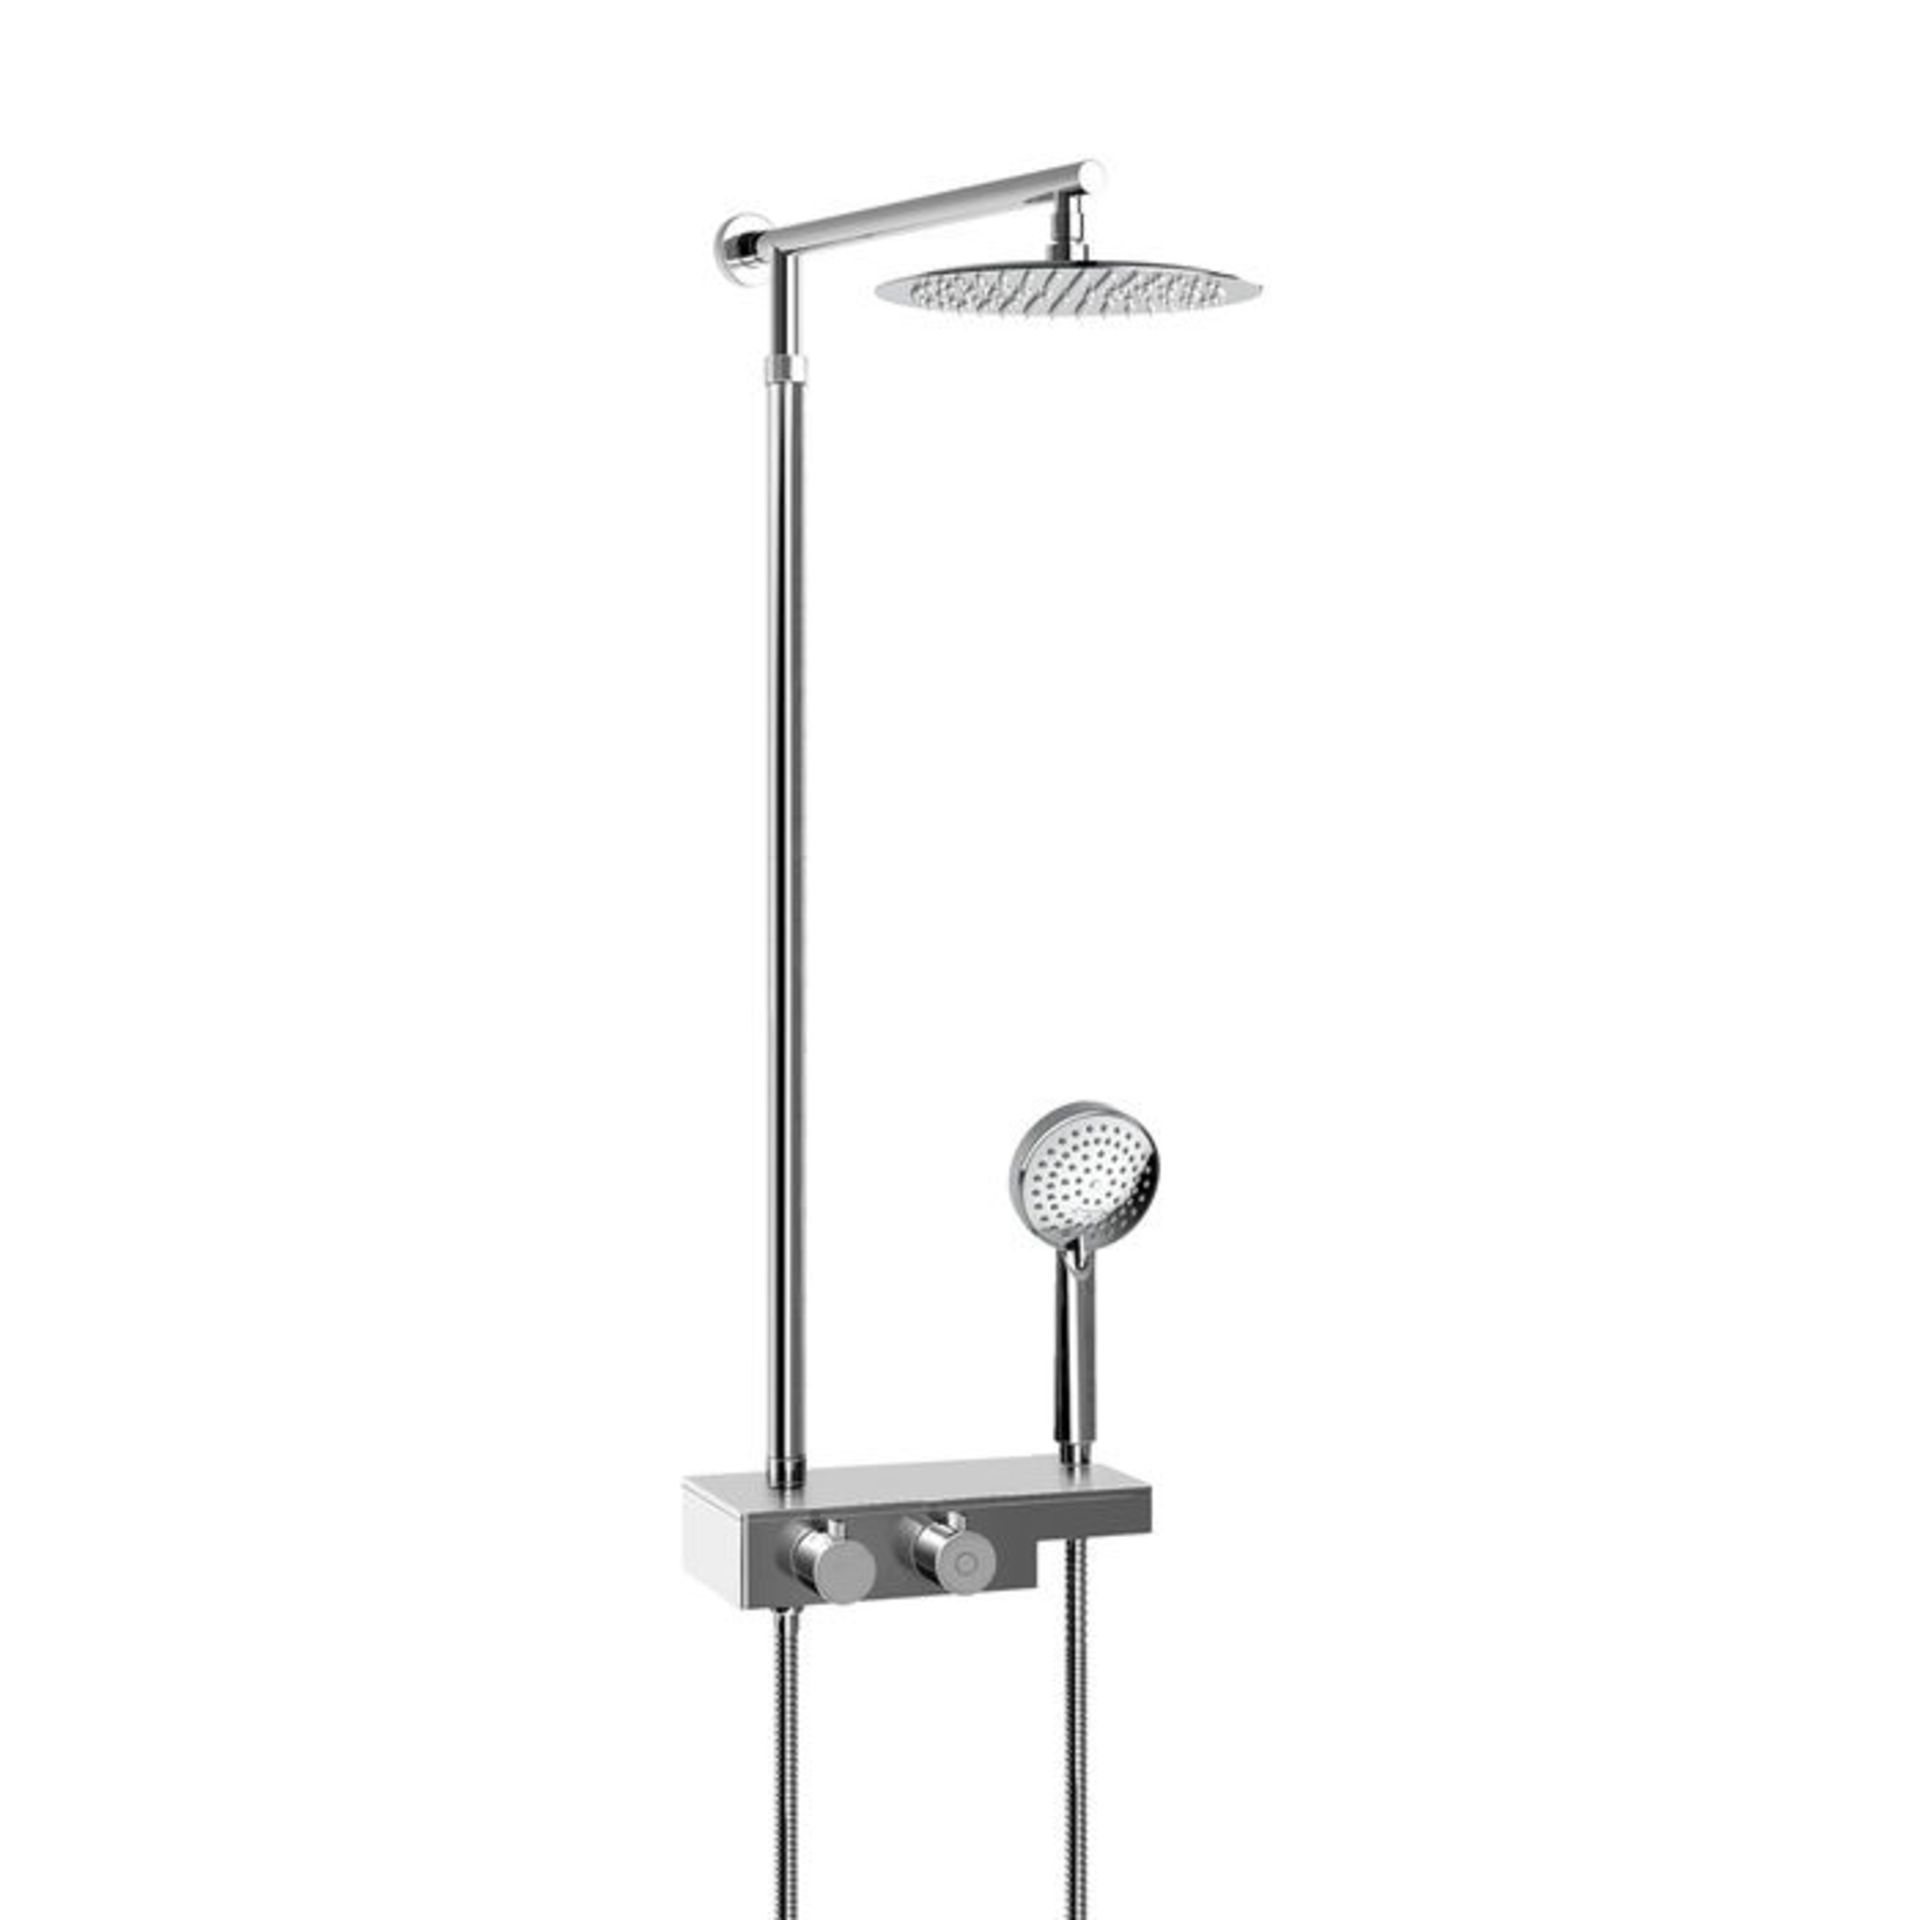 (UK264) Round Exposed Thermostatic Mixer Shower Kit & Large Head. Cool to touch shower for - Image 2 of 4